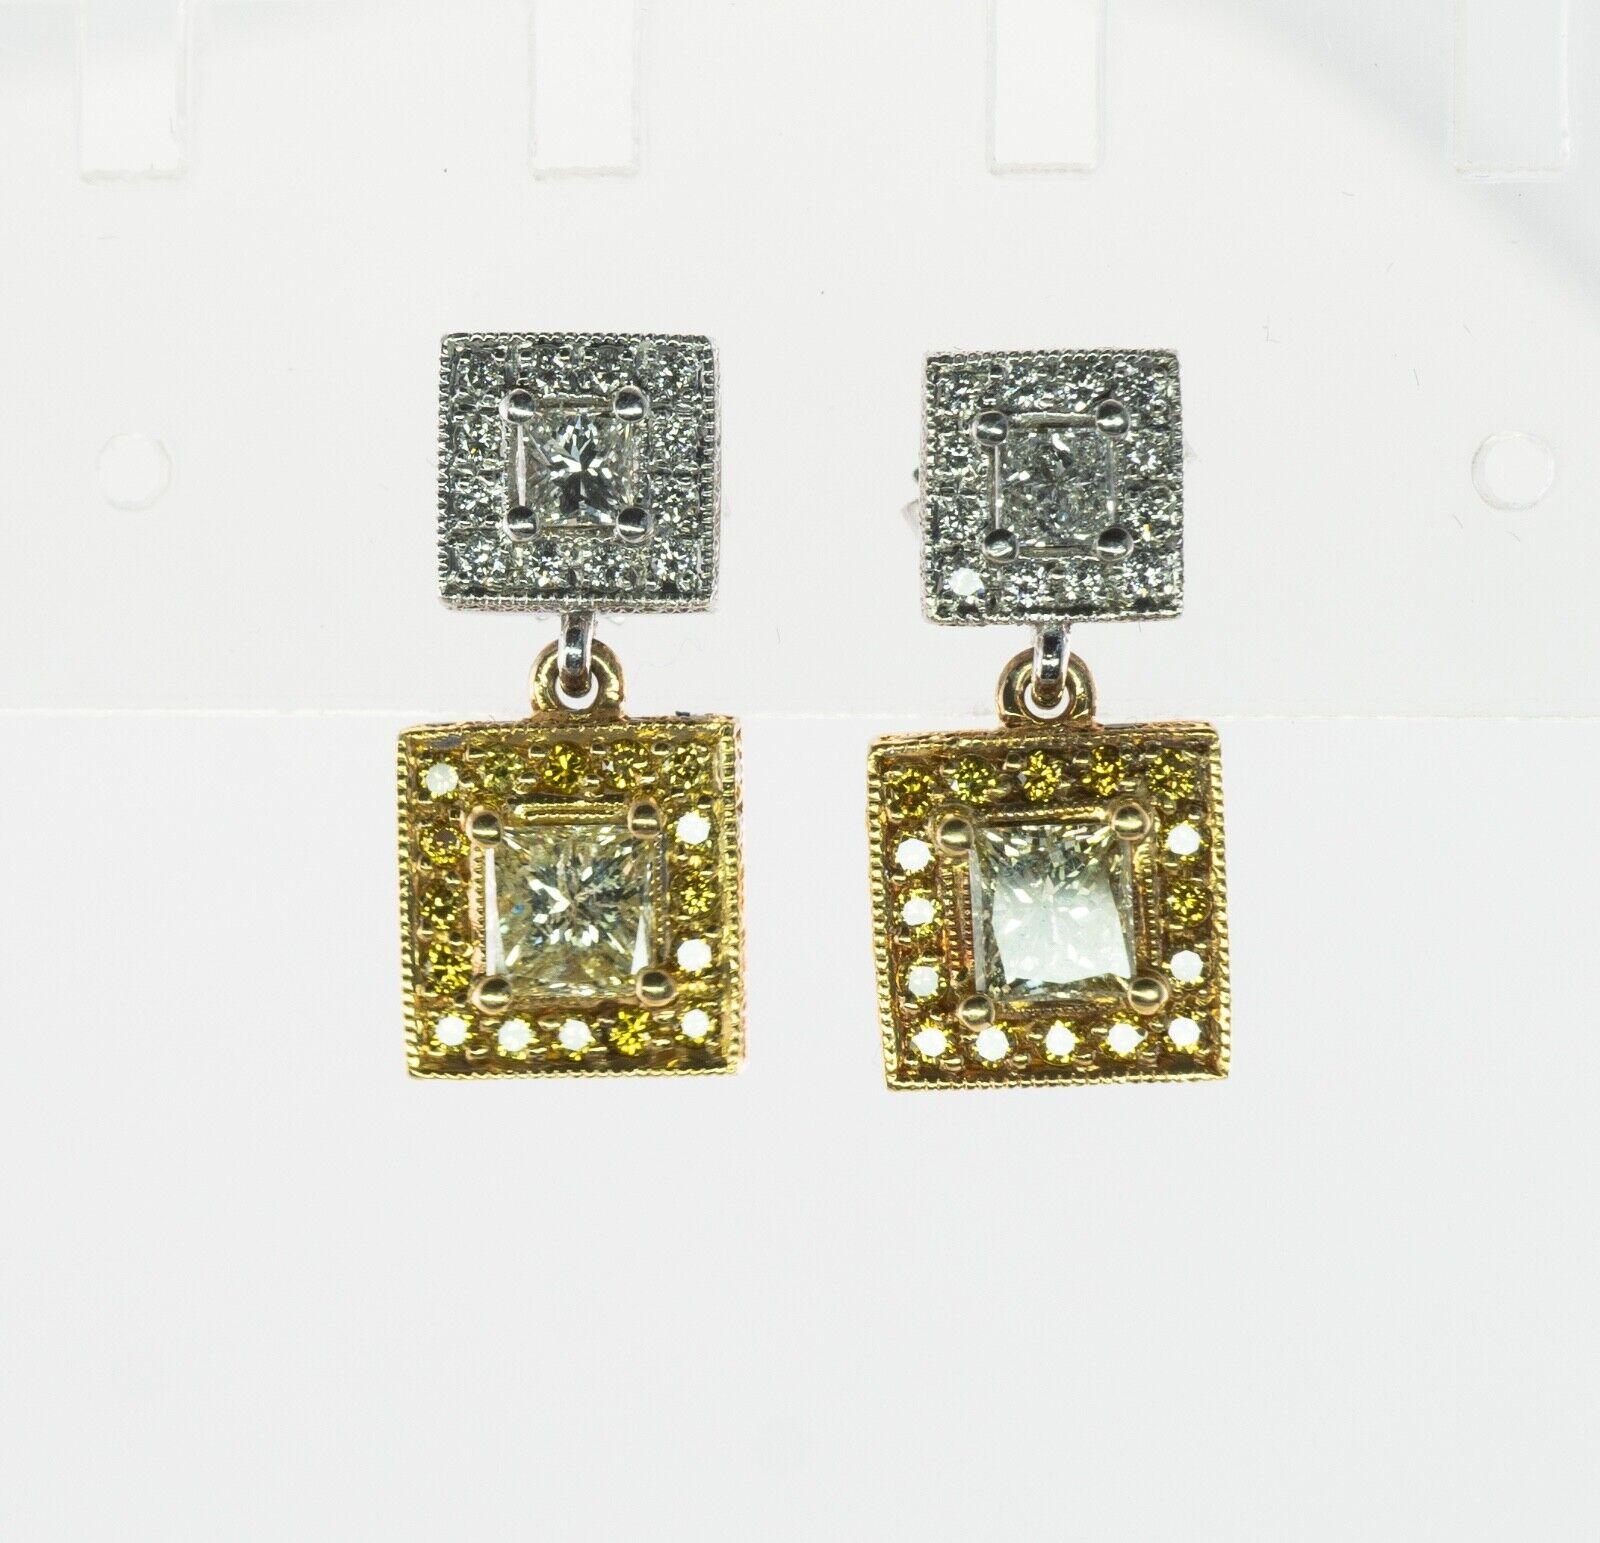 Diamond Earrings 18K Gold Platinum Dangle 2.84 TDW

These gorgeous earrings are crafted in solid 18K Yellow gold and Platinum. The gold is carefully tested and guaranteed. There is a stamp PL (platinum) on the upper part of one earring (tested